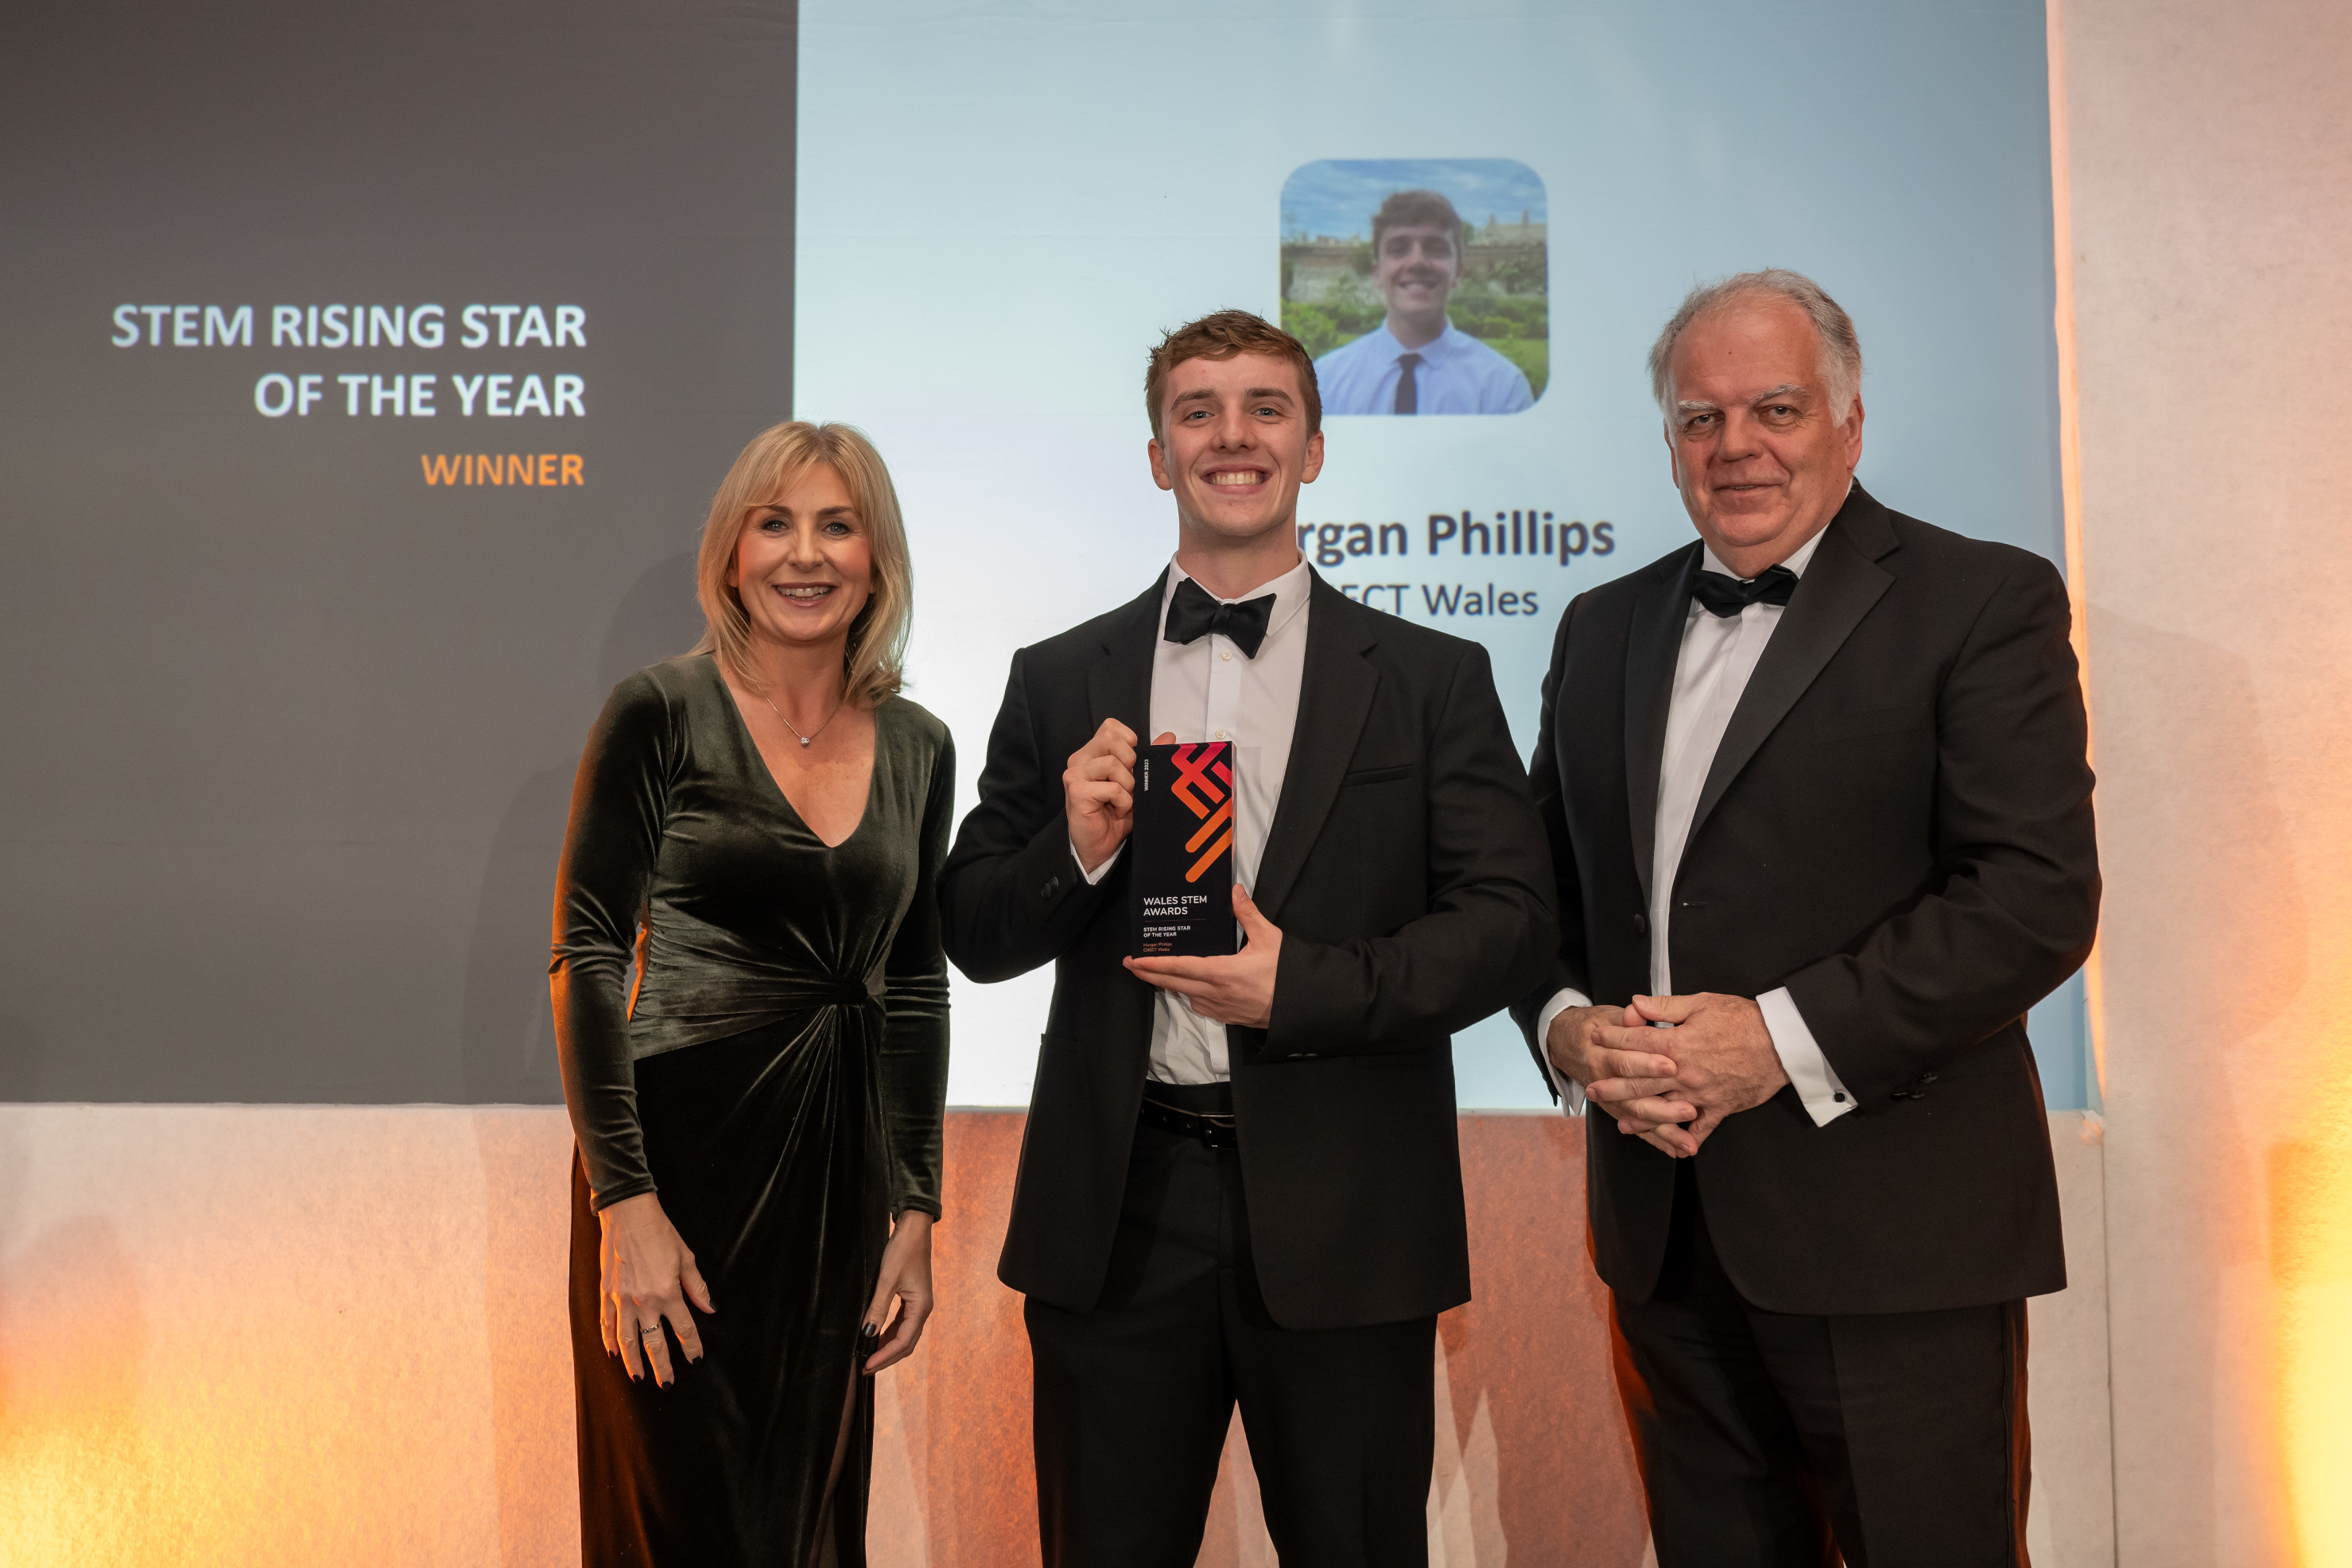 Morgan Phillips from CNECT Wales wins STEM Rising Star of the Year Award